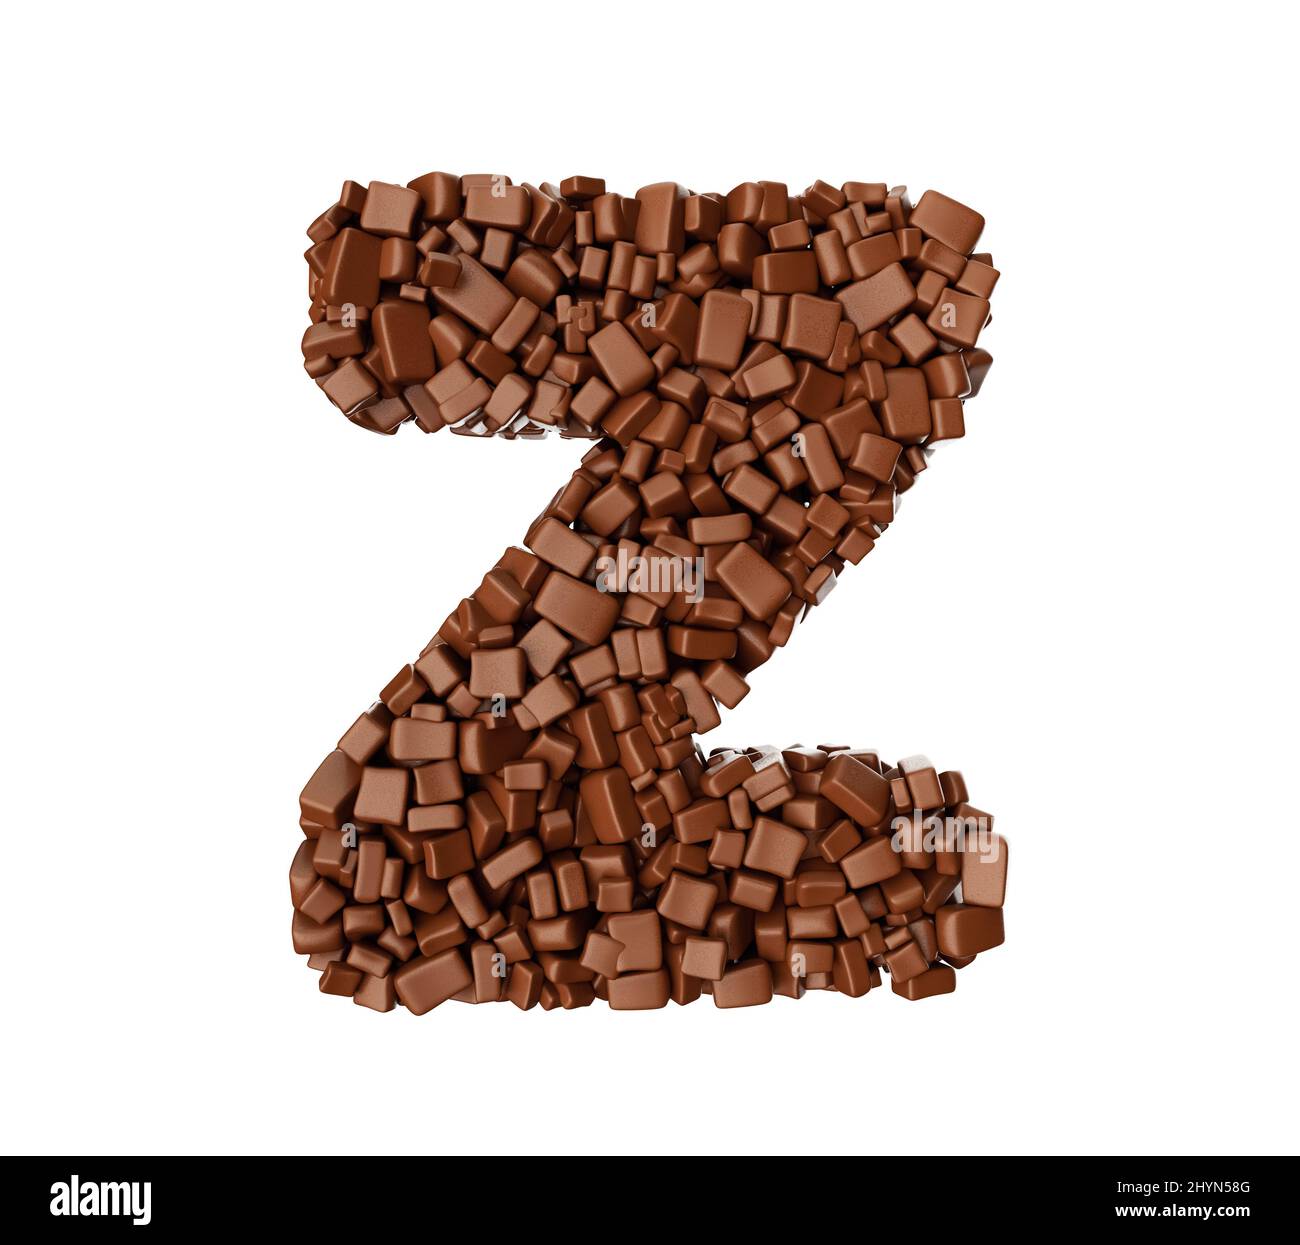 3D illustration of the Alphabet Z made of chocolate chips Stock Photo